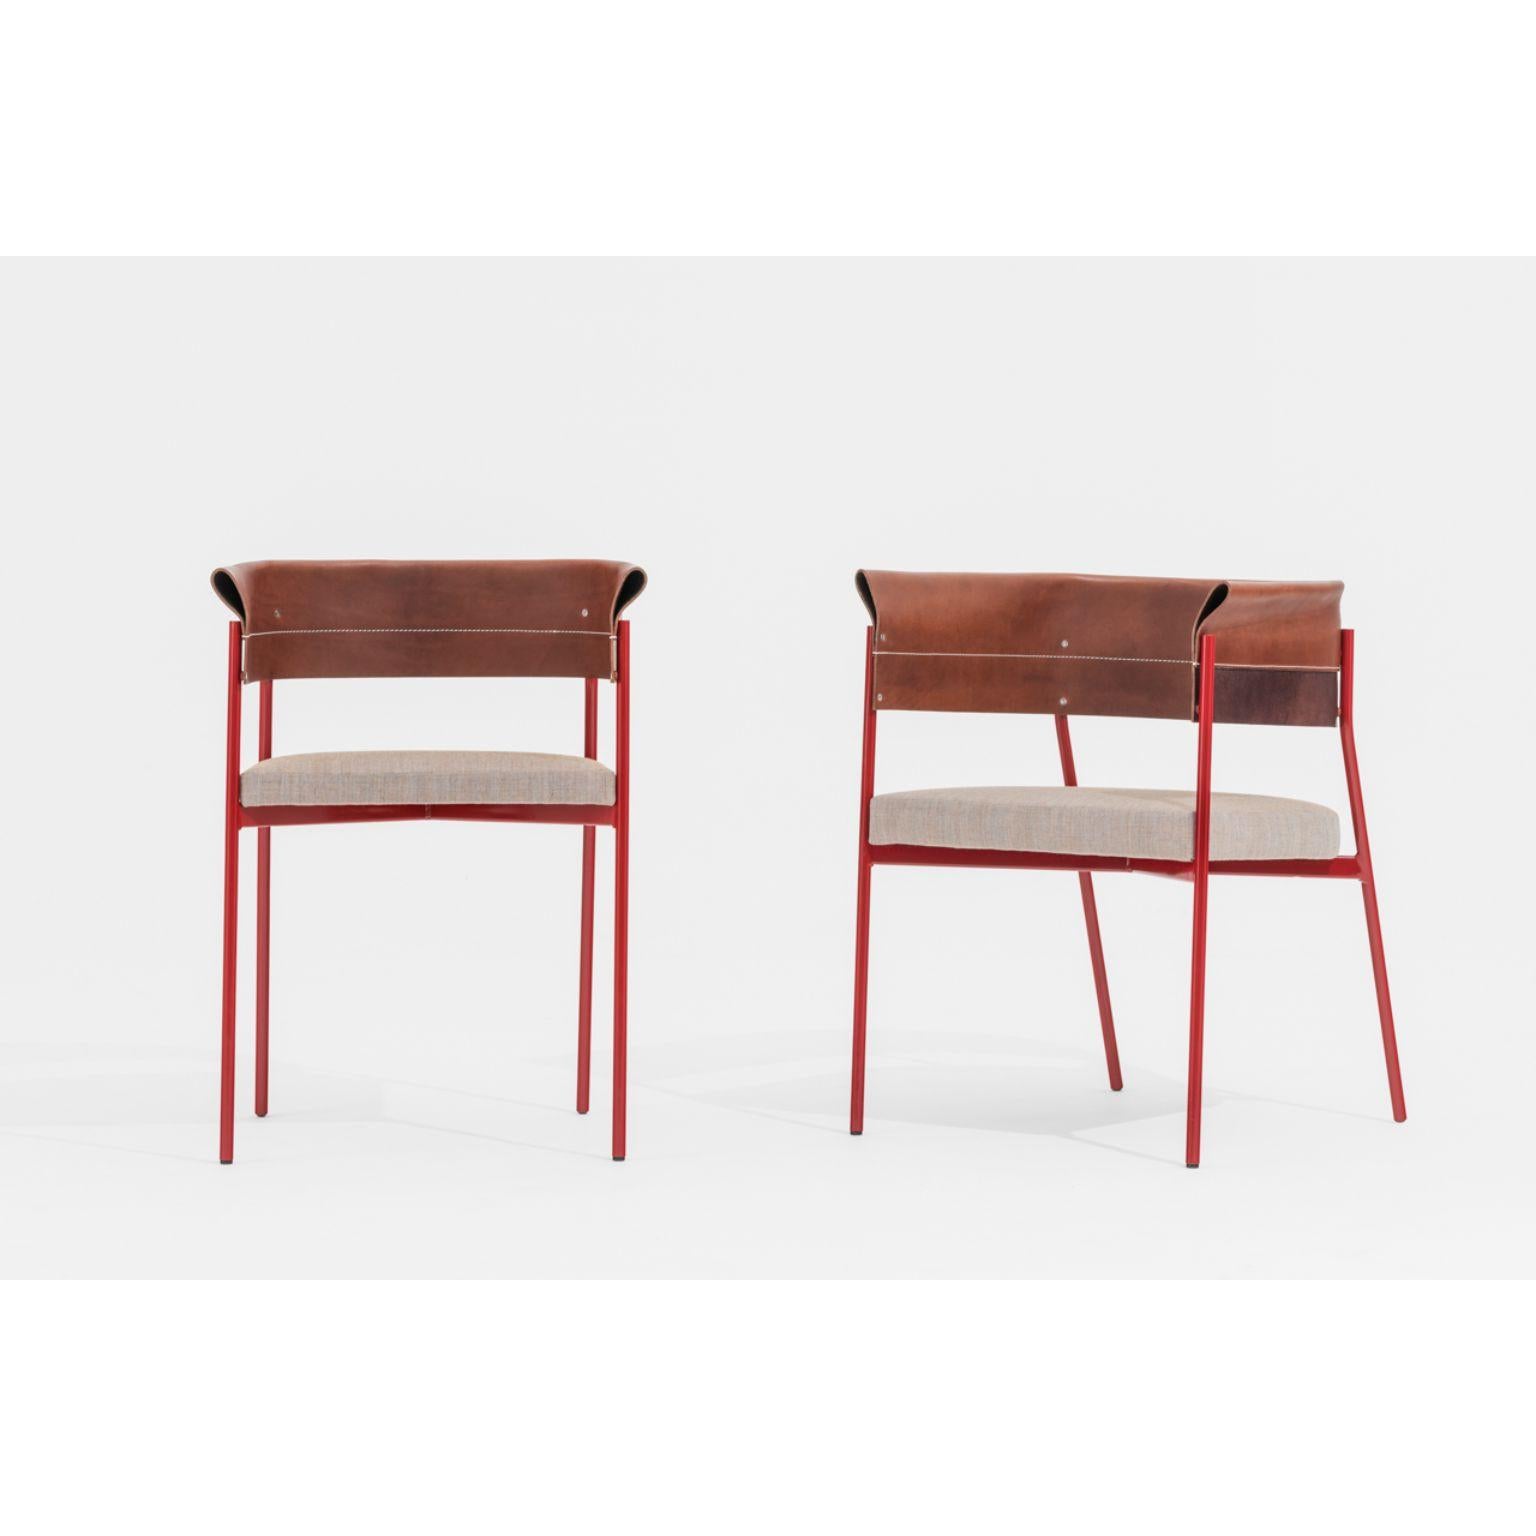 Set of Gomito chairs by SEM
Dimensions: W 54 x D 45 x H 75 cm
Material: lacquered hand-welved steel frame in colours, backrest in precious folded and sewn leather,Upholstered seat in fabric Canvas 2 by Kvadrat.
Also available in different colors.